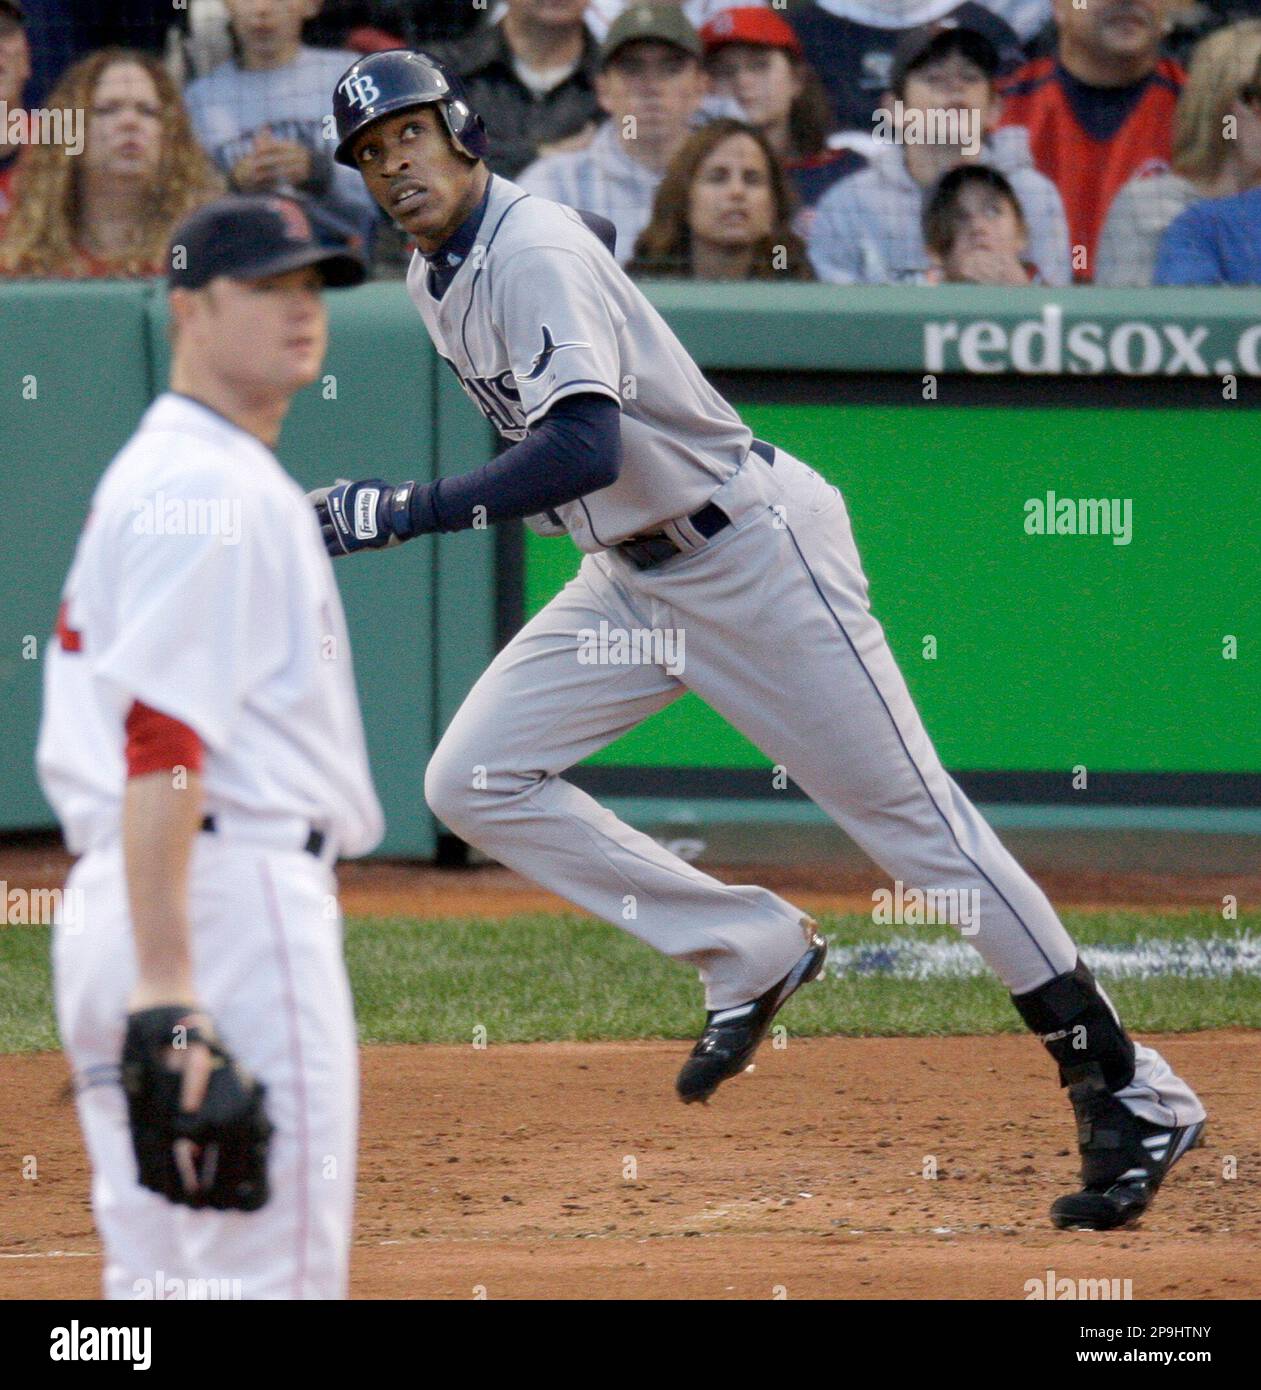 Boston Red Sox pitcher Jon Lester, left, and Tampa Bay Rays' B.J. Upton  watch Upton's three run home run in the third inning against the Red Sox in  Game 3 of the